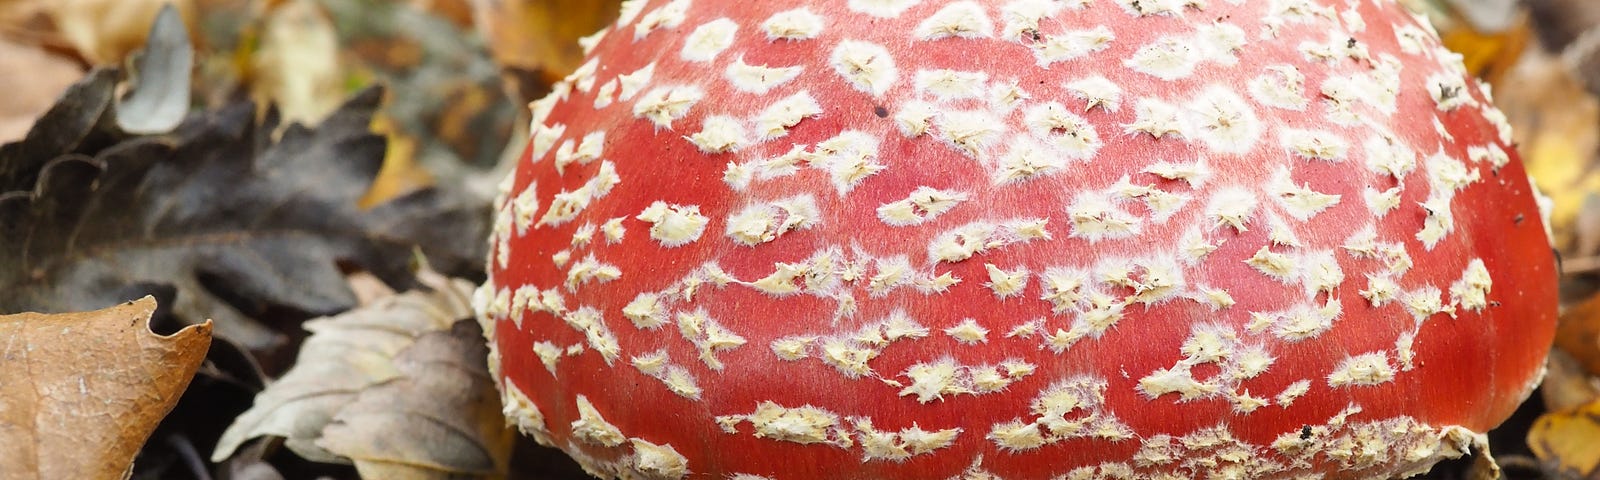 Fly agaric fungus with red cap covered in white spots